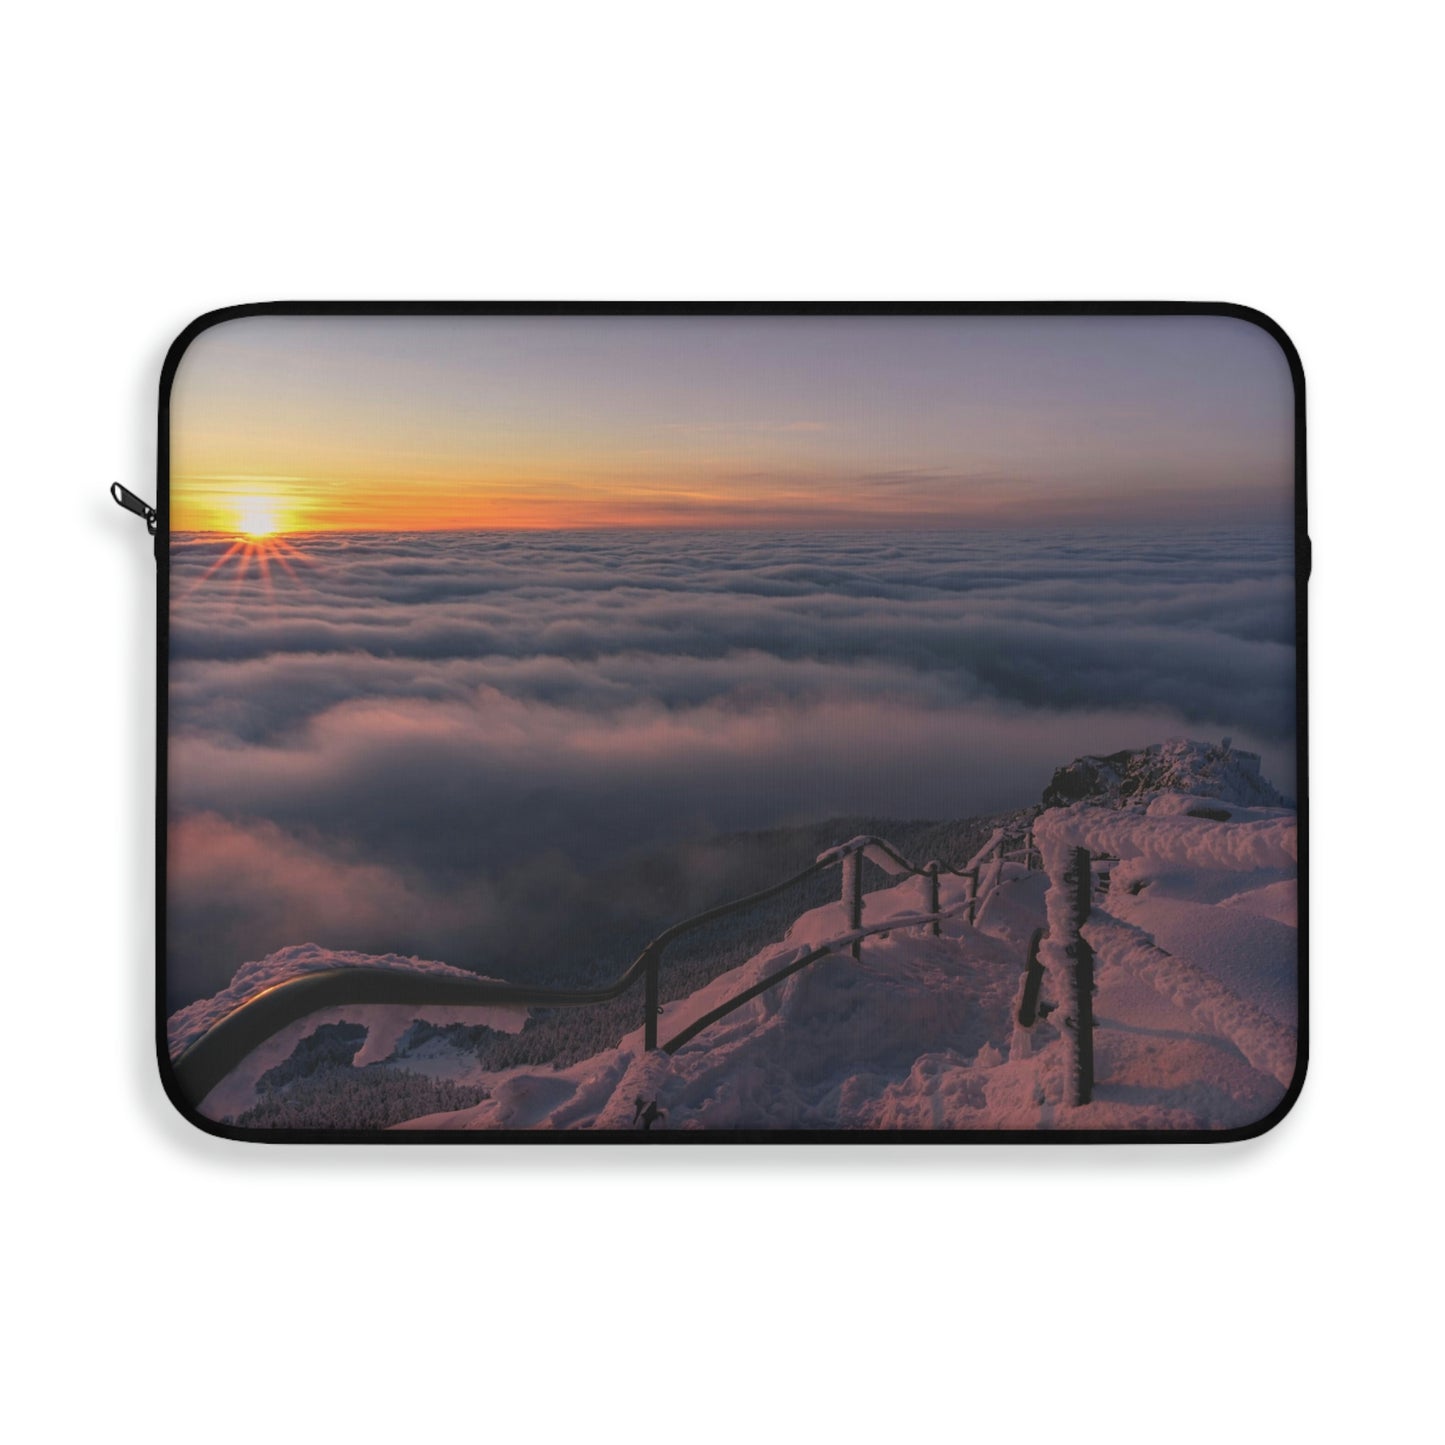 Laptop Sleeve - Stairway to Heaven, Whiteface Mt.